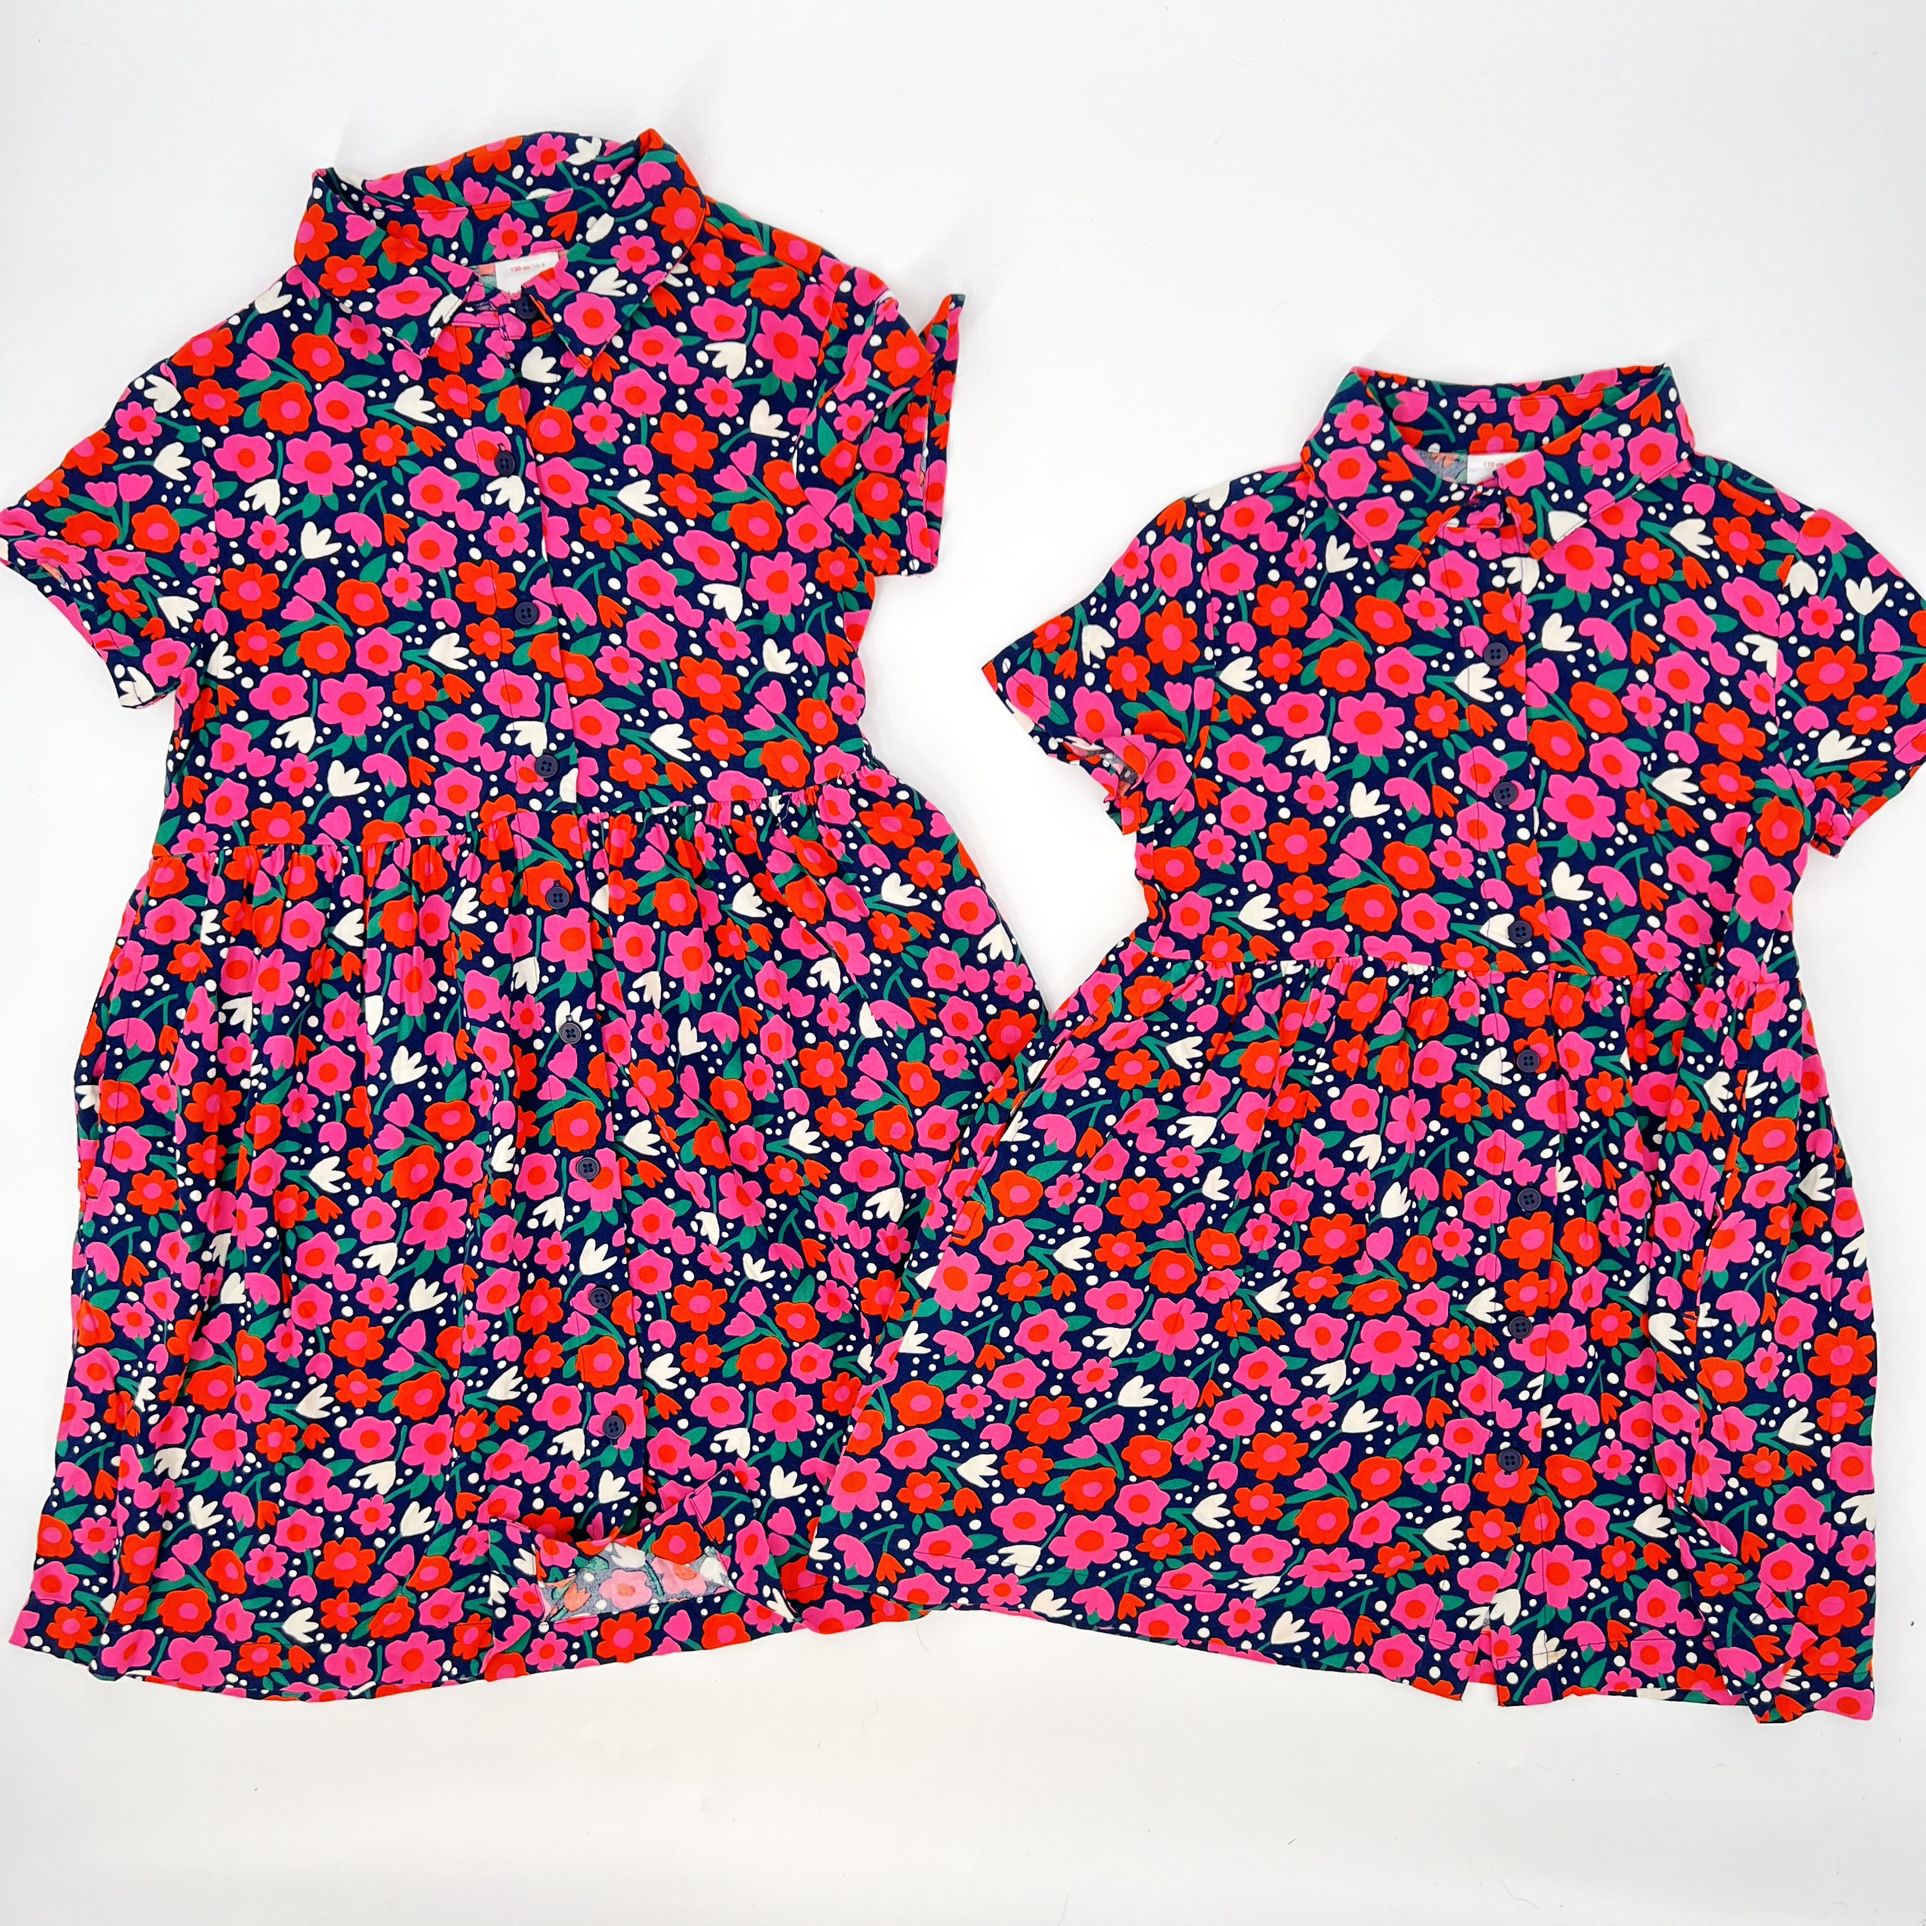 Hanna Andersson Sister Set of Spring Floral Tulip Flowers Girls Sizes 8 and 5